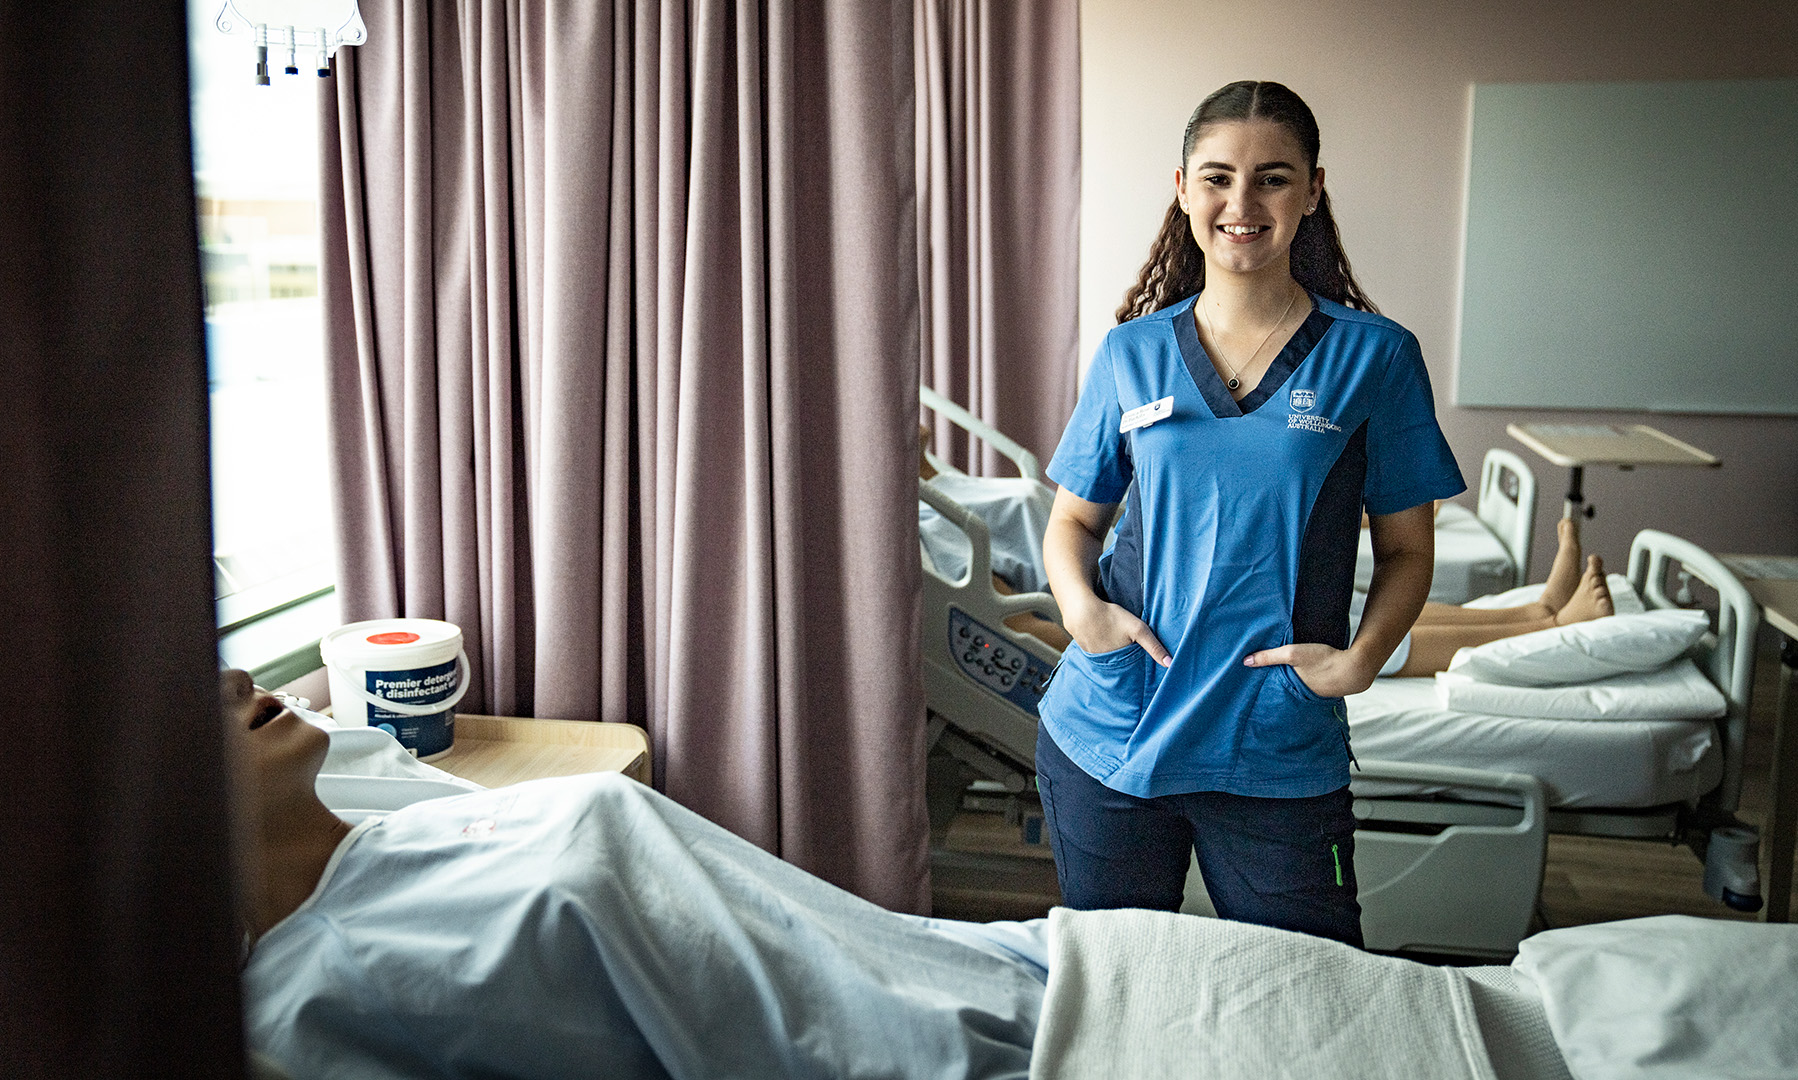 How Jessica Di Bartolo’s passion for healthcare led her to a rewarding career in nursing